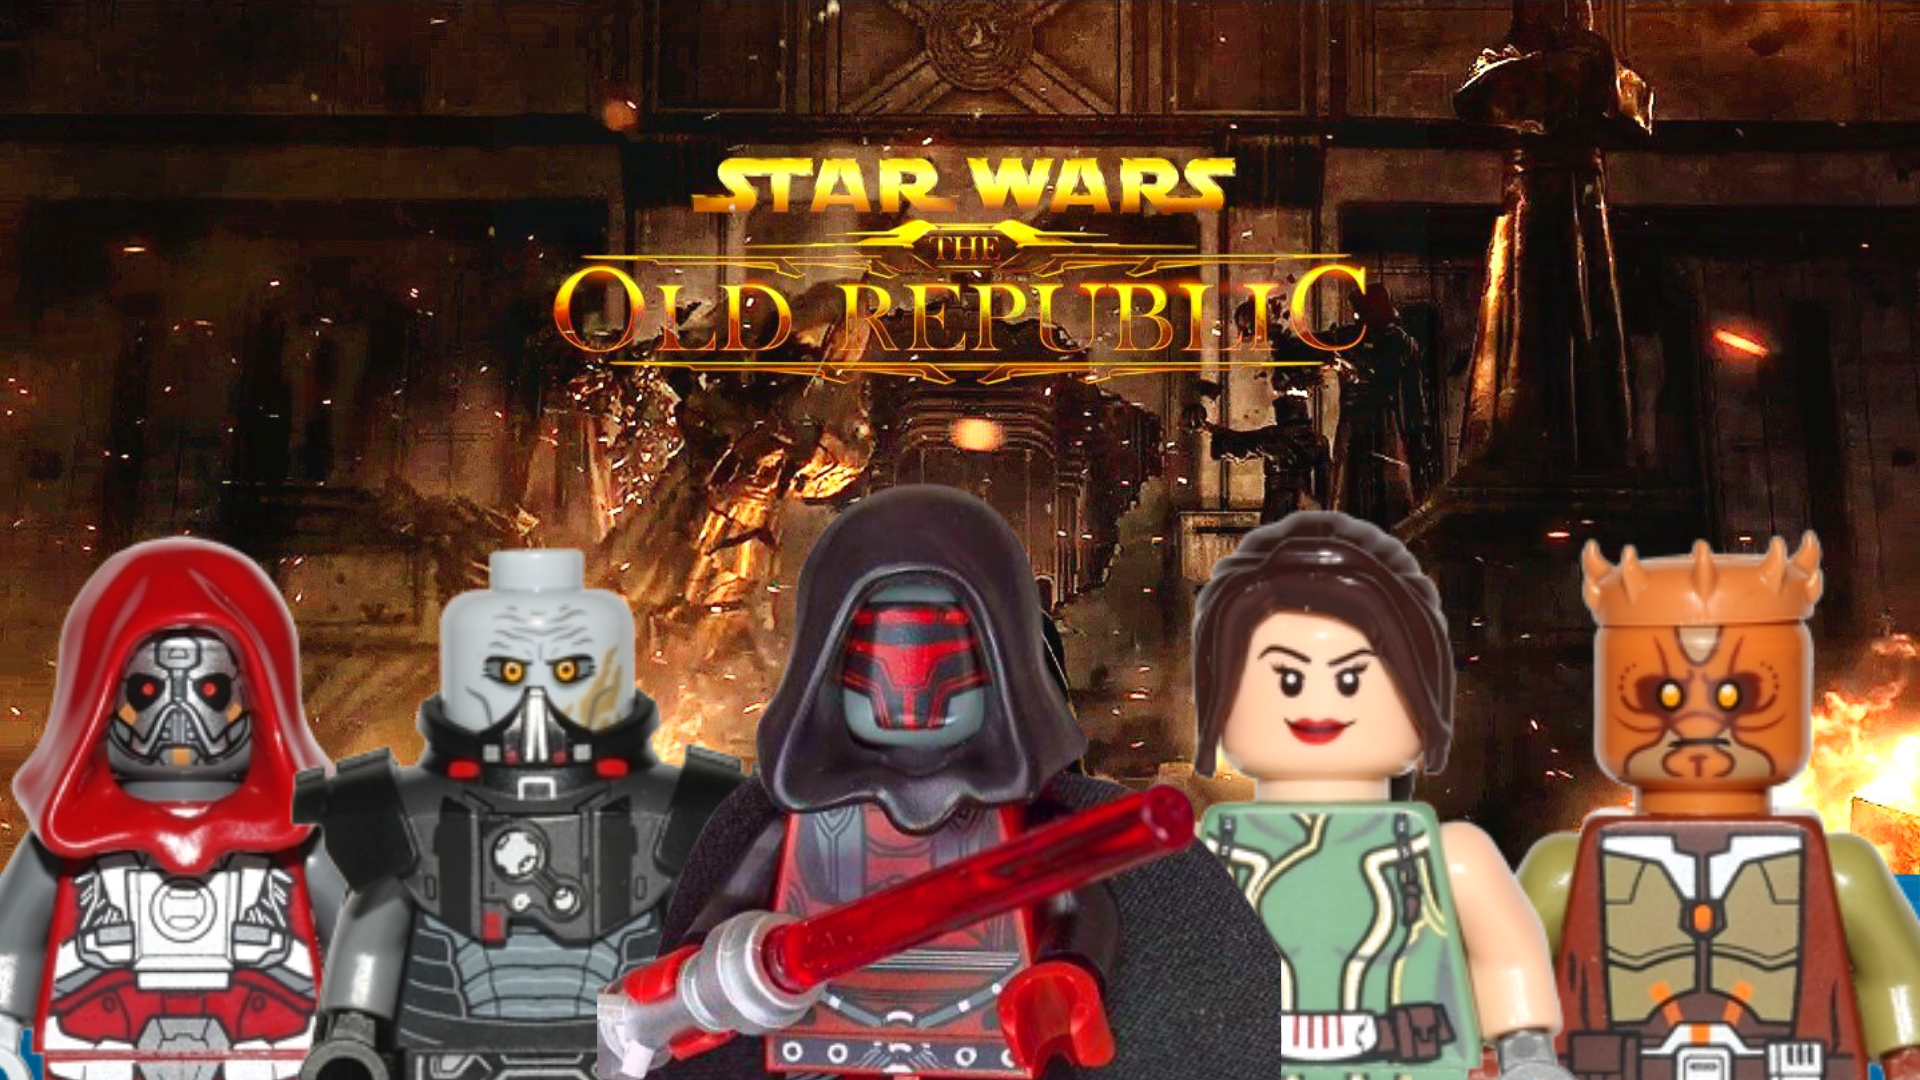 knights of the old republic lego